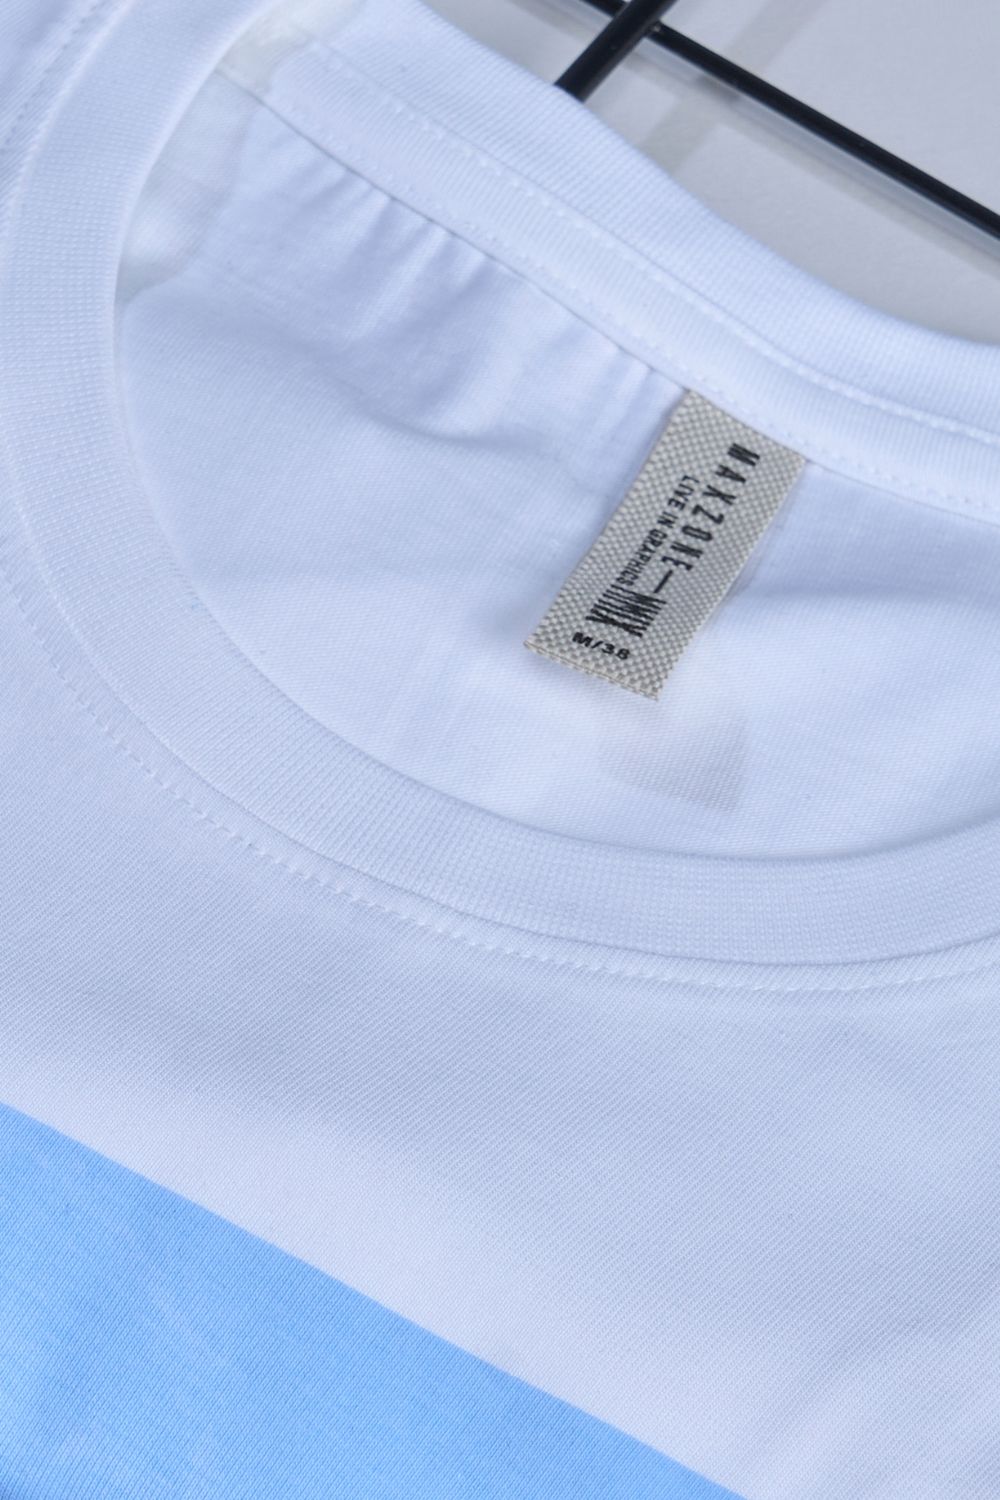 White colored, cotton Graphic inc T shirt for men, half sleeves and round neck, product close up.